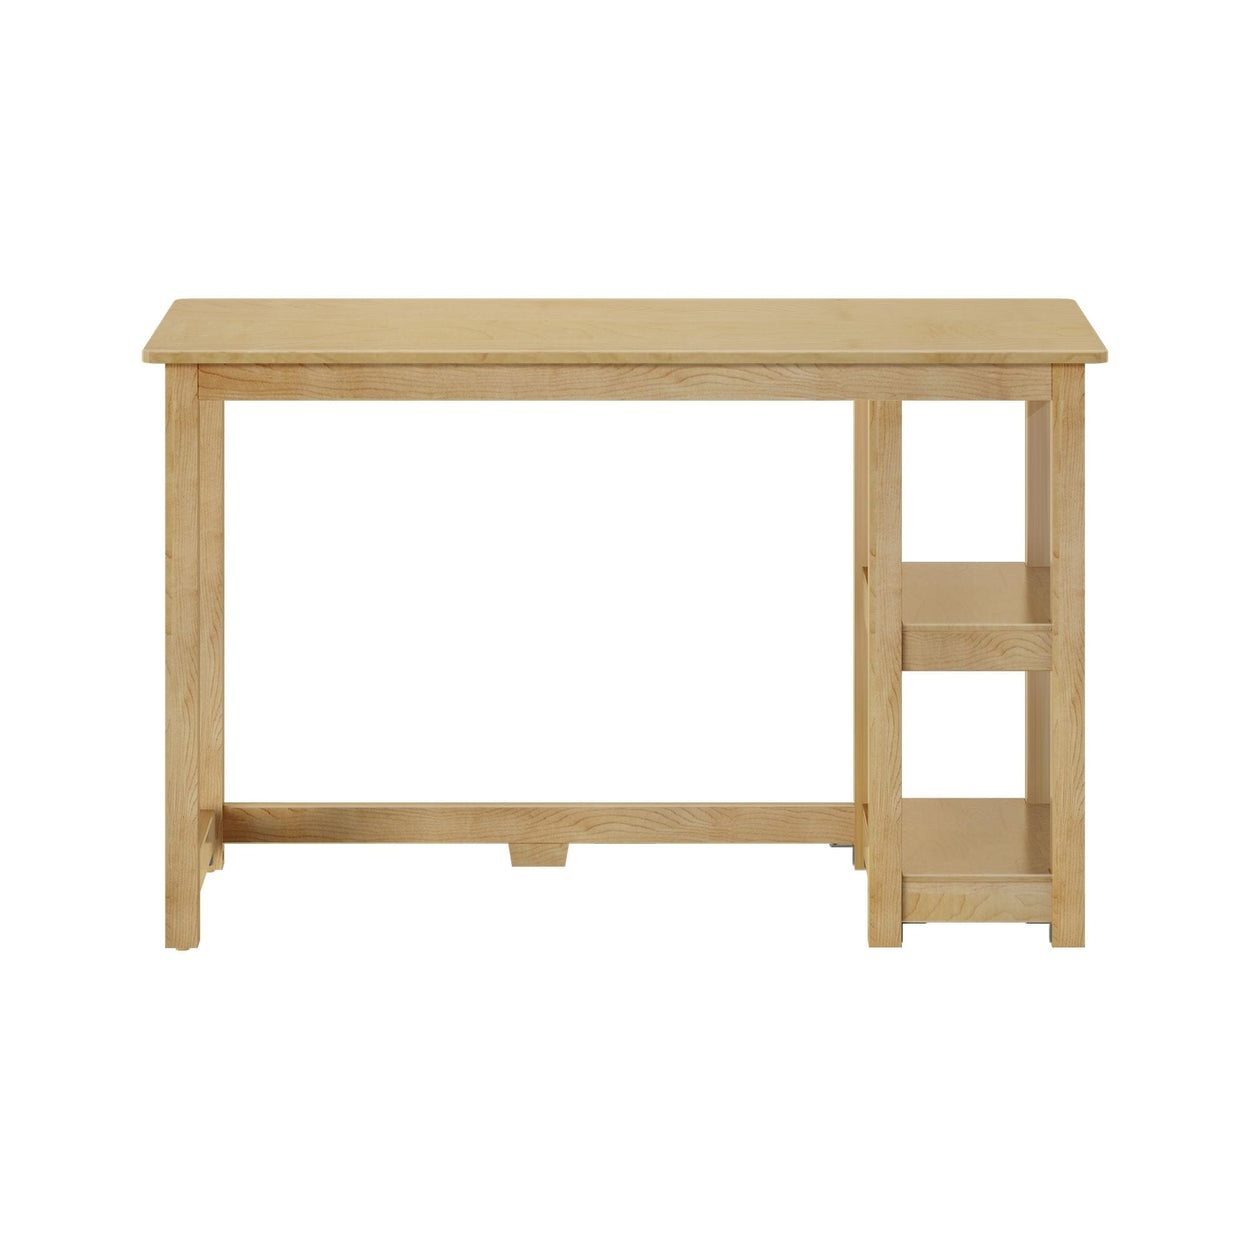 181205-001 : Furniture Desk with Bookshelves - 47 inches, Natural